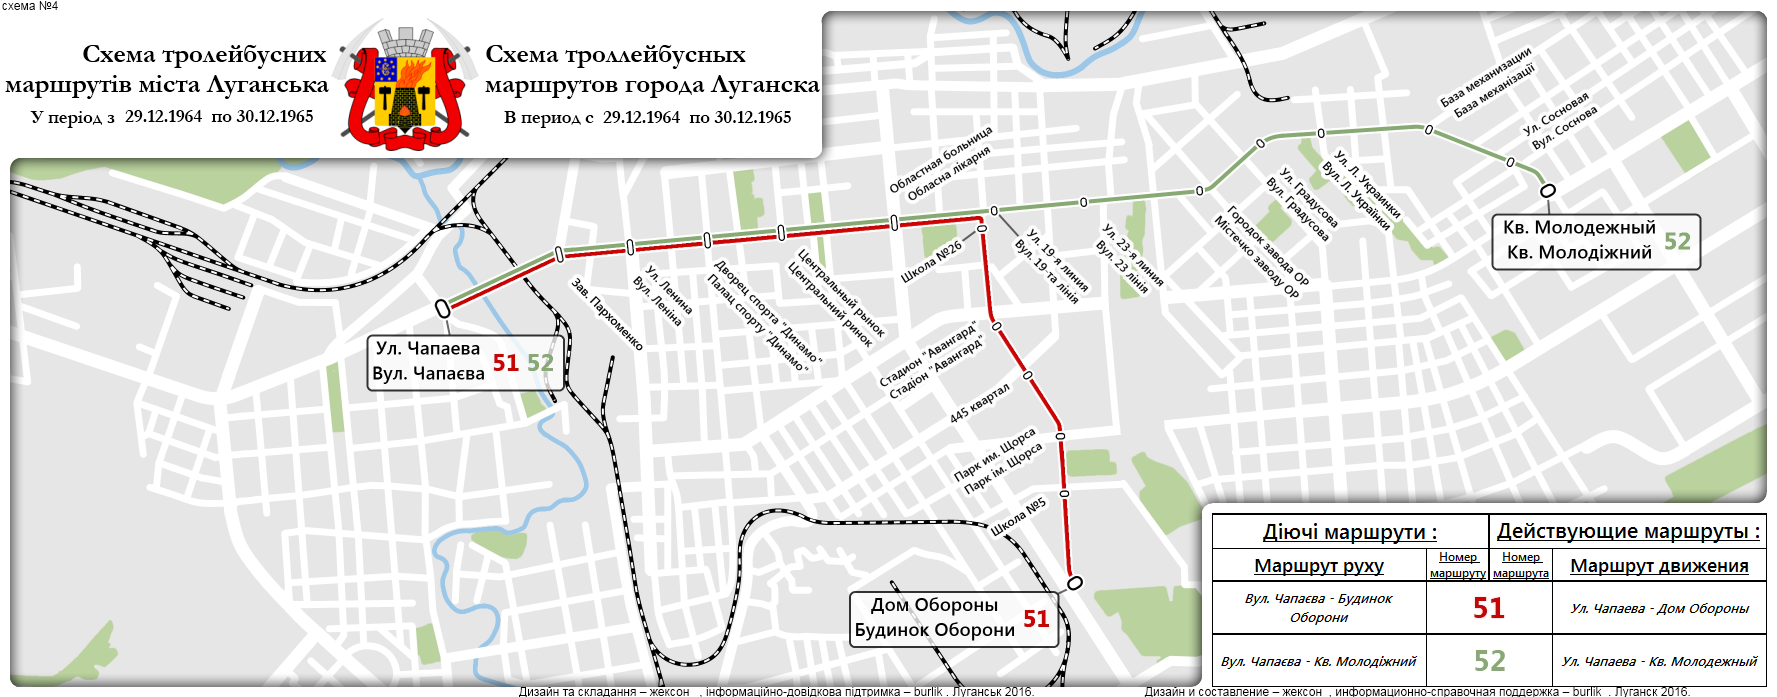 Luhansk — Historic Mas of Trolleybus Routes